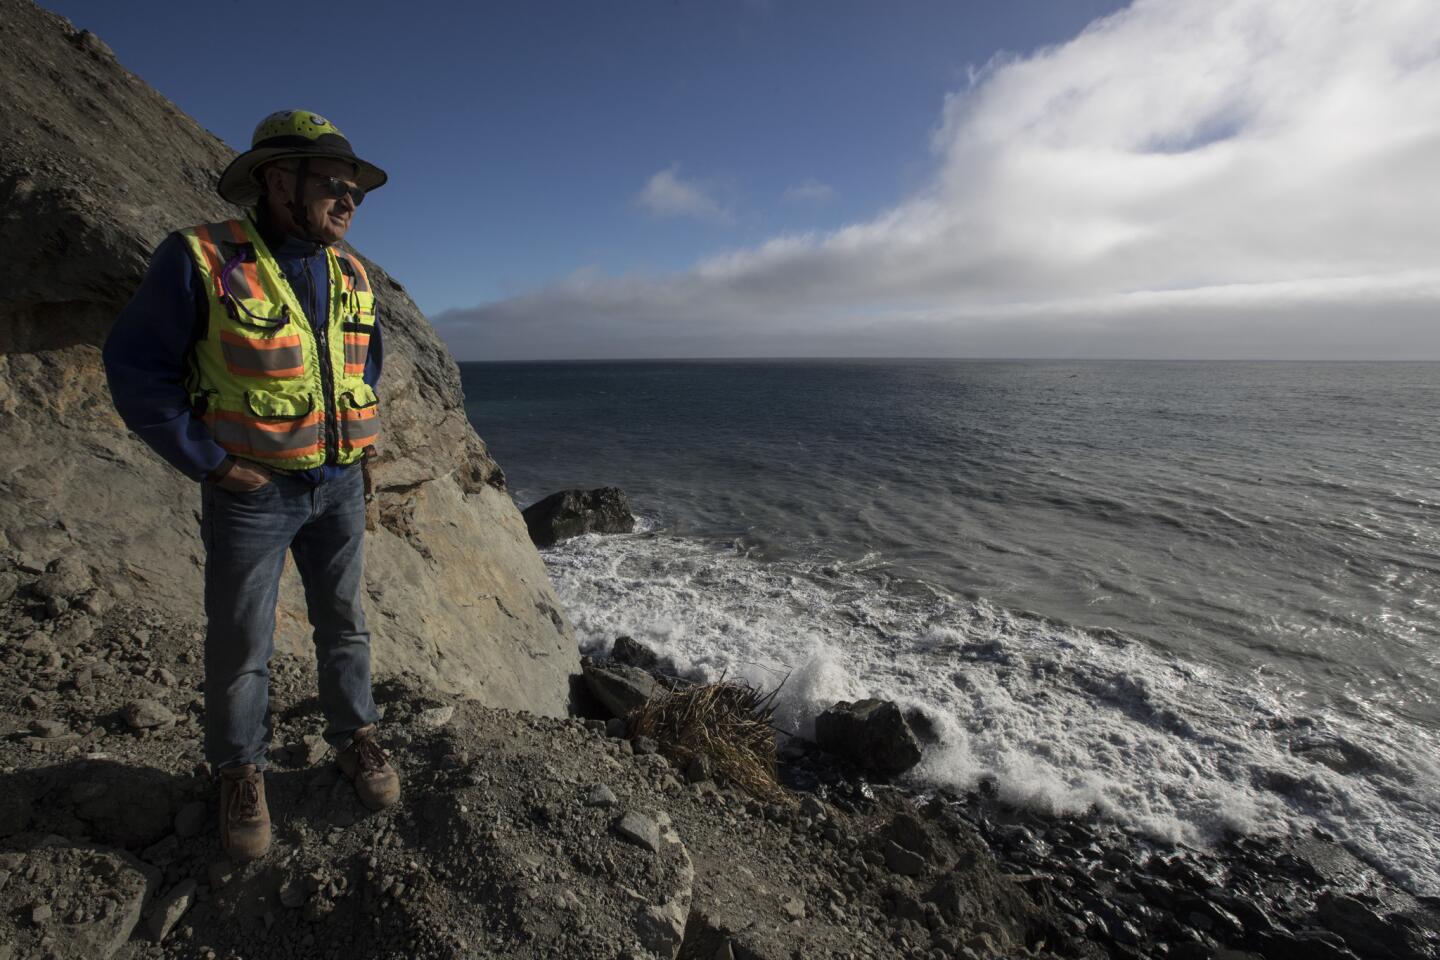 California 1 in Big Sur set to reopen